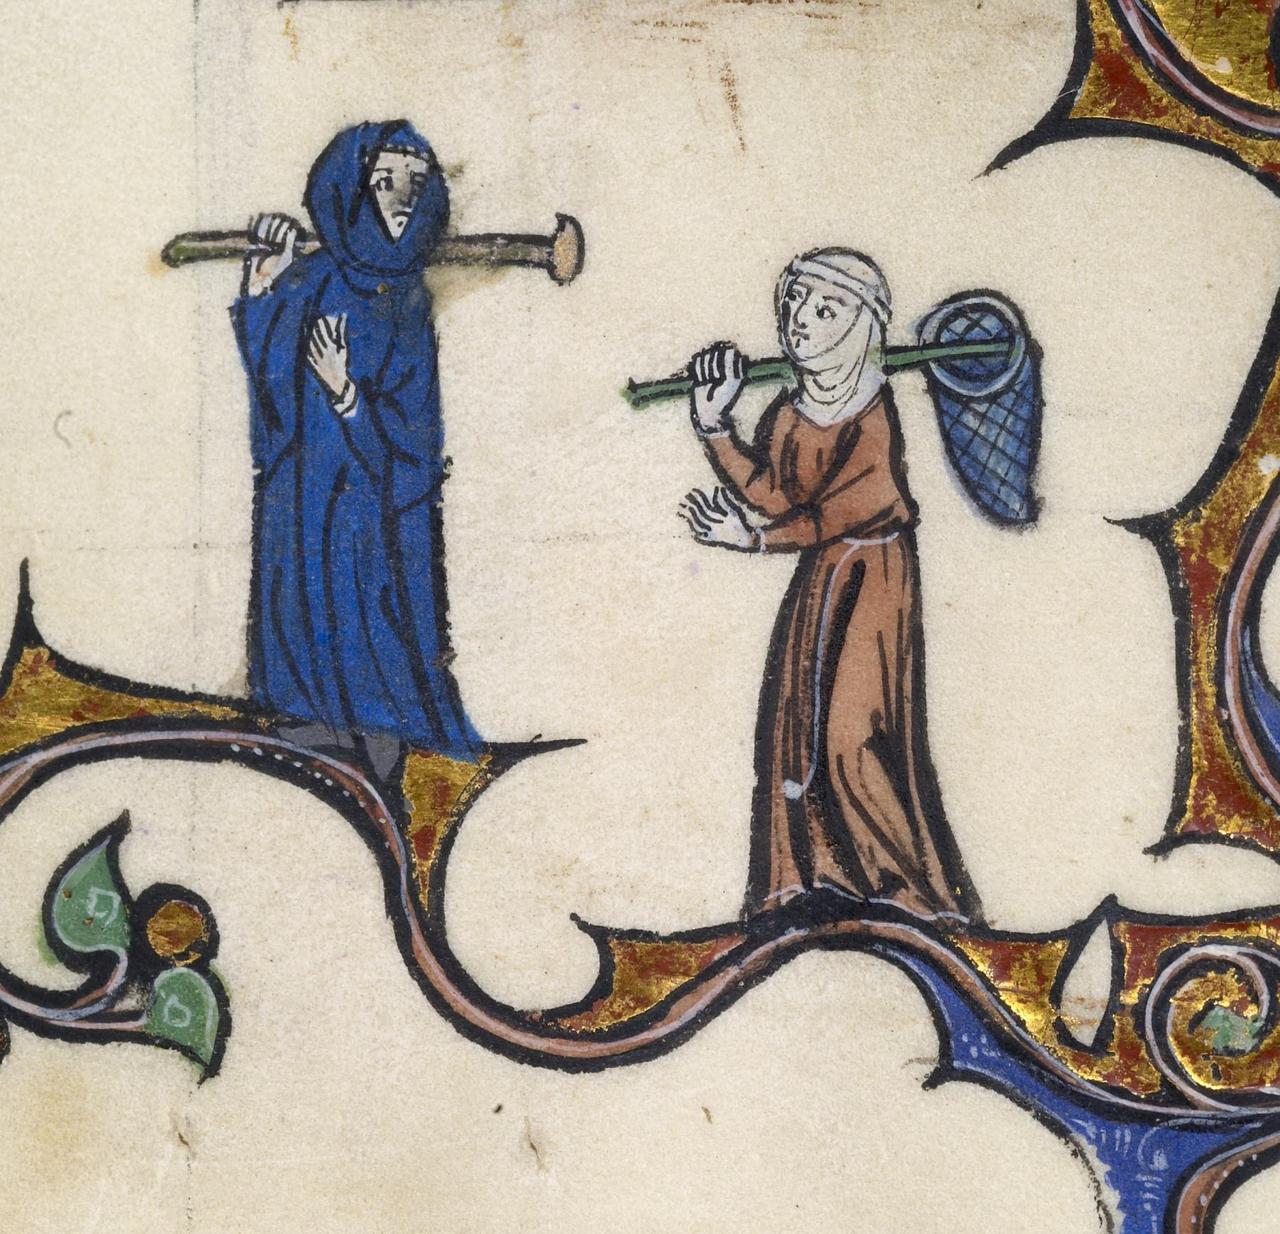 Pretty medieval manuscript of the day is a butterfly hunt! Here we have two thirteenth century ladies of fashion off on an adventure.
Image source: Walters Museum 109. Creative Commons licensed.